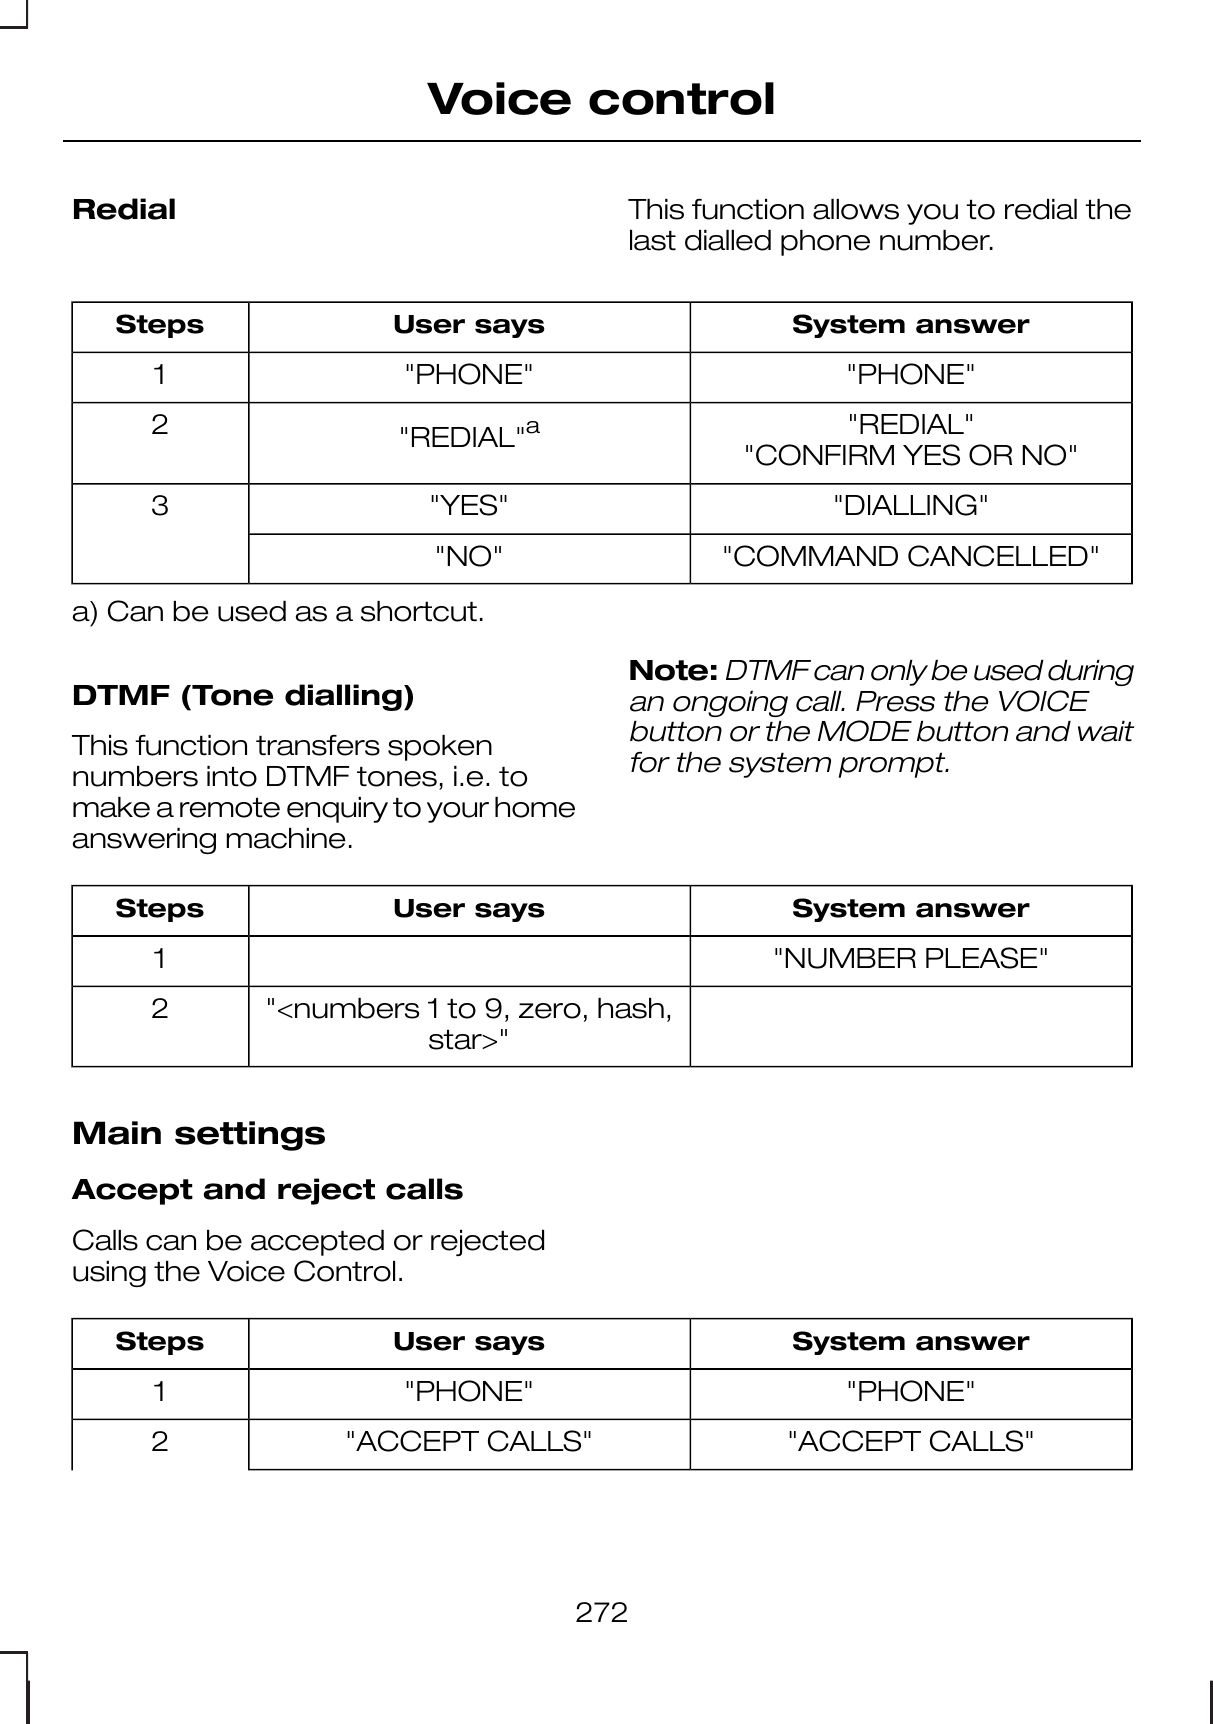 Redial This function allows you to redial thelast dialled phone number.System answerUser saysSteps&quot;PHONE&quot;&quot;PHONE&quot;1&quot;REDIAL&quot;&quot;REDIAL&quot;a2&quot;CONFIRM YES OR NO&quot;&quot;DIALLING&quot;&quot;YES&quot;3&quot;COMMAND CANCELLED&quot;&quot;NO&quot;a) Can be used as a shortcut.DTMF (Tone dialling)This function transfers spokennumbers into DTMF tones, i.e. tomake a remote enquiry to your homeanswering machine.Note:DTMF can only be used duringan ongoing call. Press the VOICEbutton or the MODE button and waitfor the system prompt.System answerUser saysSteps&quot;NUMBER PLEASE&quot;1&quot;&lt;numbers 1 to 9, zero, hash,star&gt;&quot;2Main settingsAccept and reject callsCalls can be accepted or rejectedusing the Voice Control.System answerUser saysSteps&quot;PHONE&quot;&quot;PHONE&quot;1&quot;ACCEPT CALLS&quot;&quot;ACCEPT CALLS&quot;2272Voice control